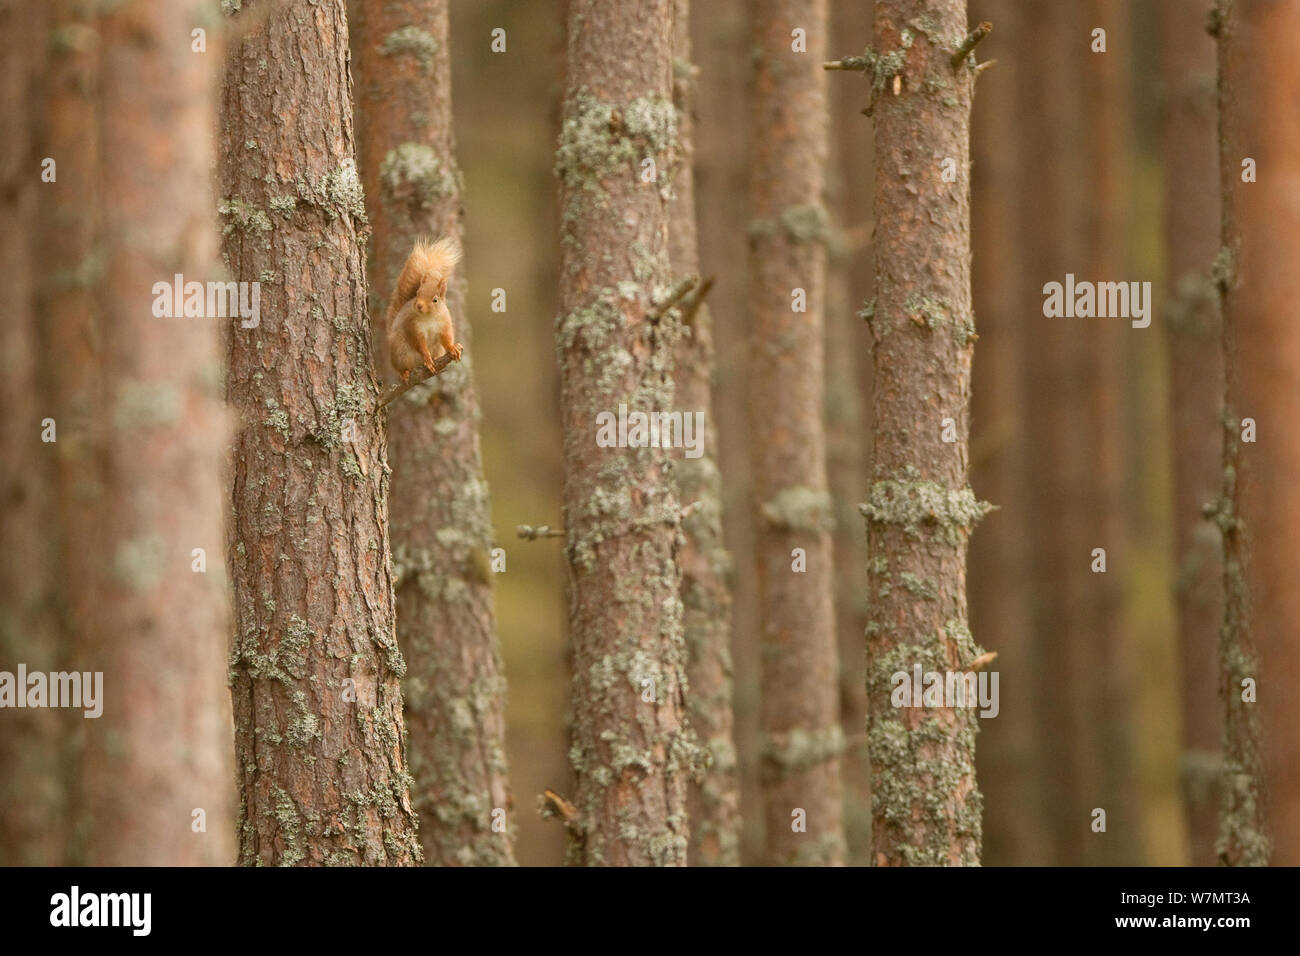 Red squirrel (Sciurus vulgaris) sitting in scots pine forest, Cairngorms National Park, Scotland, March 2012. Stock Photo